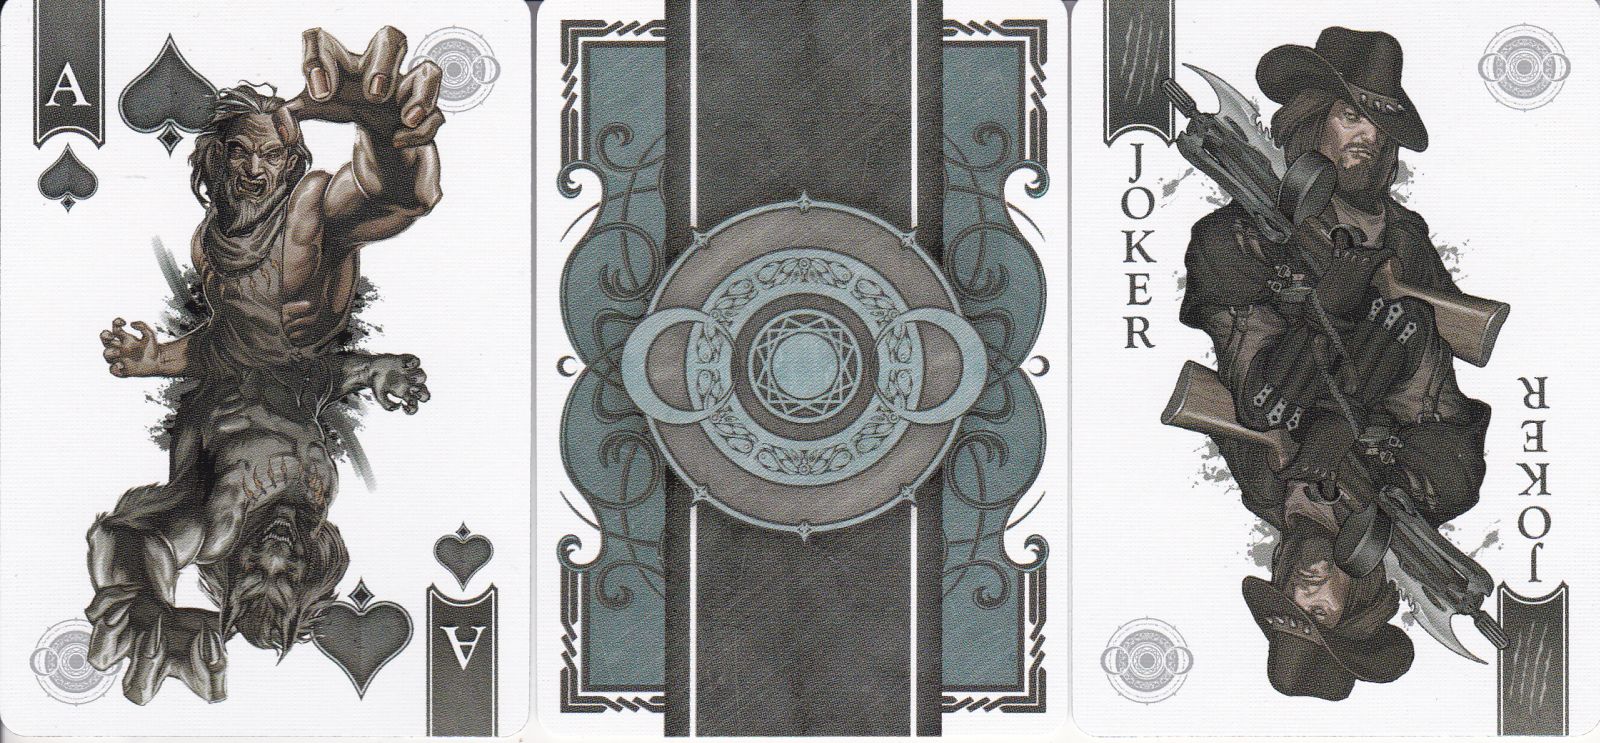 SOLOMAGIA Bicycle Viking Blizzard Wing Deck by Crooked Kings Cards